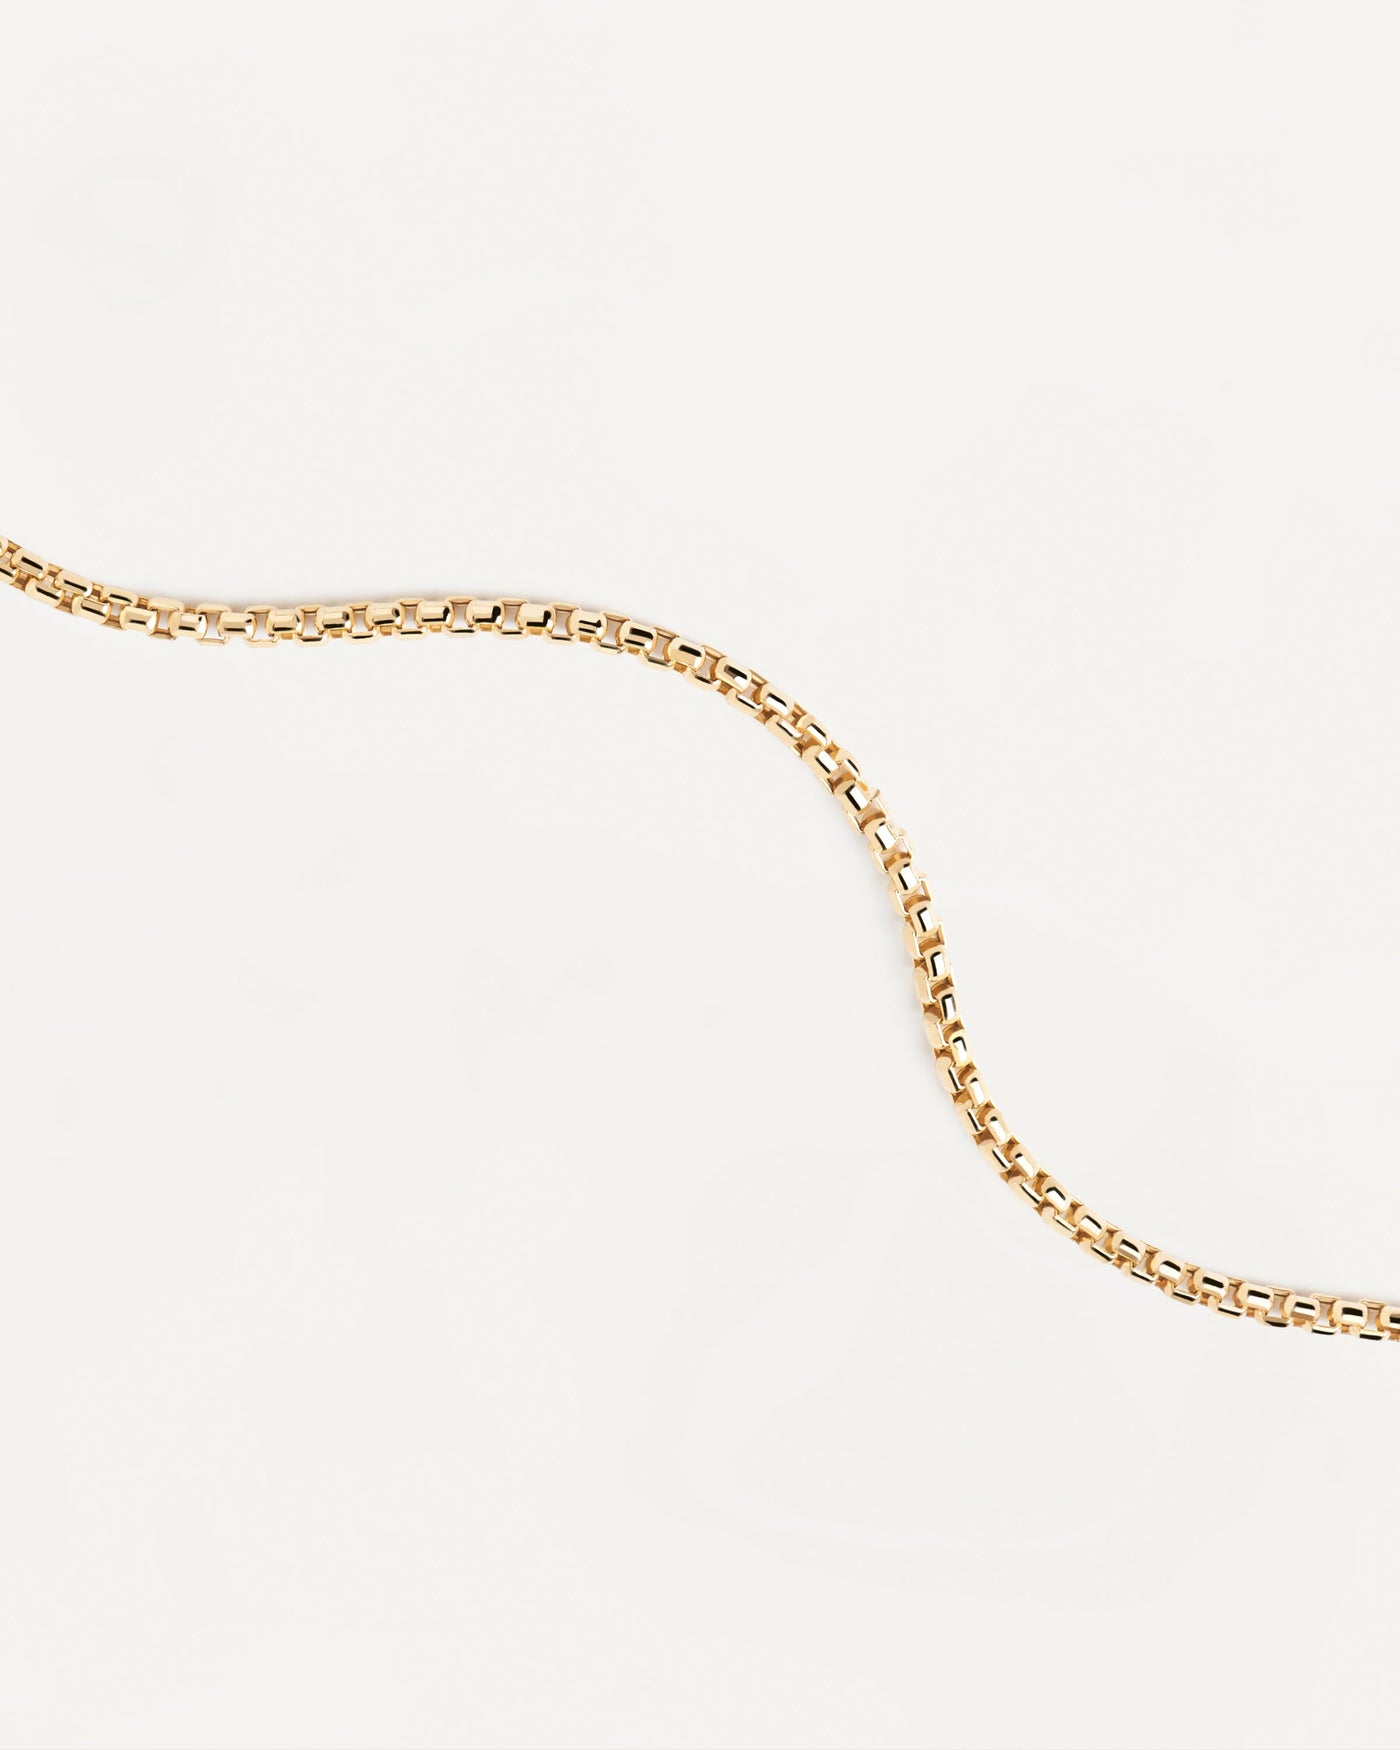 Buy 18K Solid Box Chain, 18K Pure Gold Box Chain Necklace, Diamond-cut,  Men's/women's Solid Gold Box Chain, 18 24, 2mm Thickness Box Chain Online  in India - Etsy